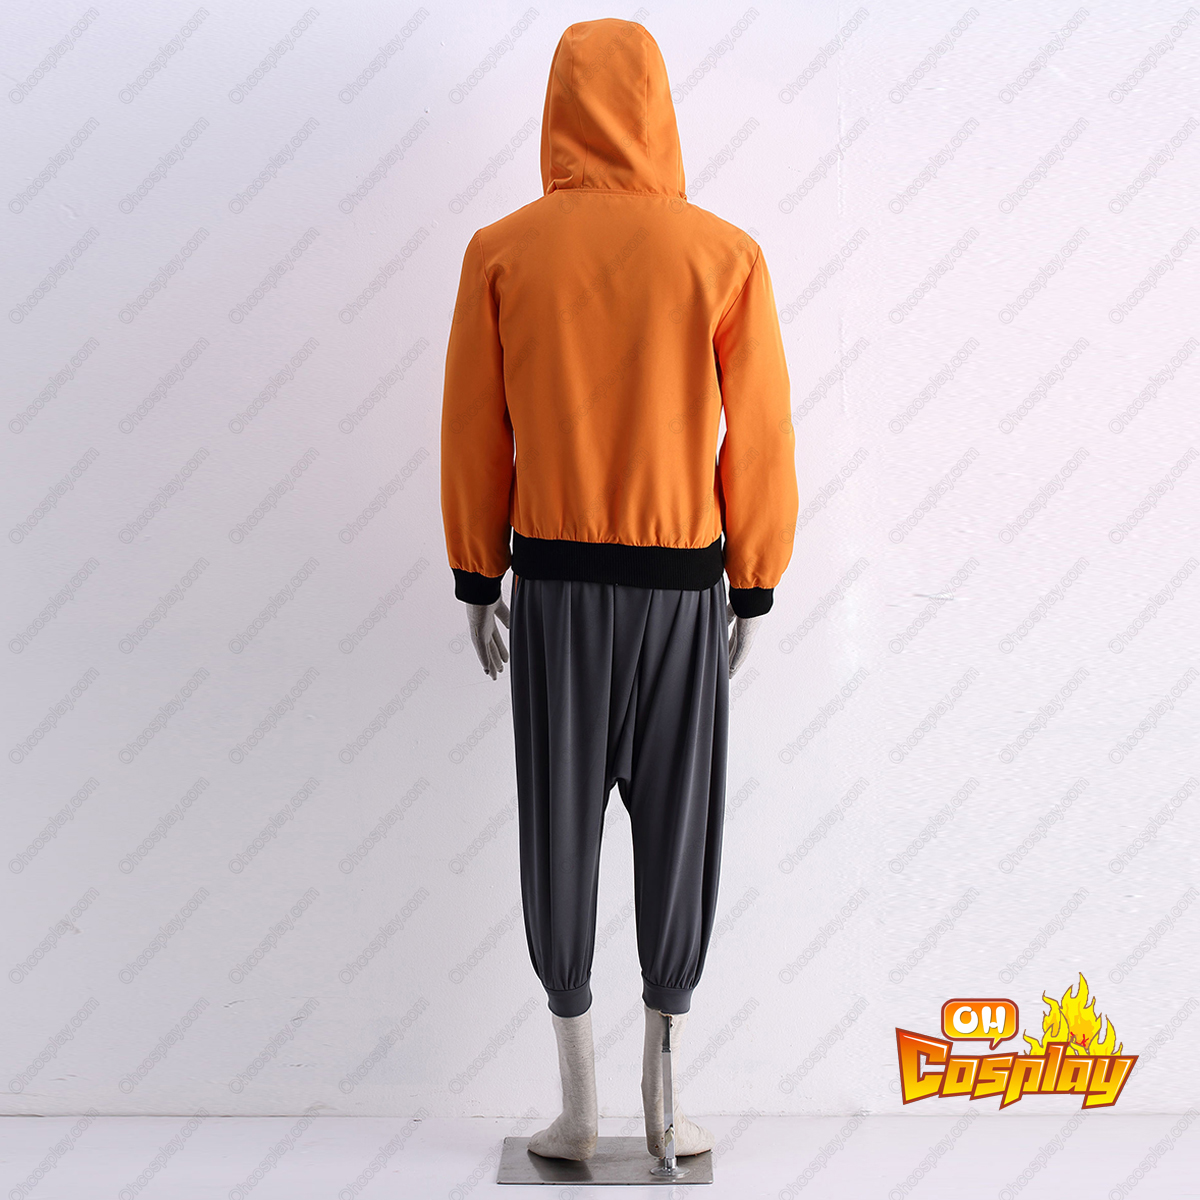 Naruto The Last Naruto 9TH Cosplay Costumes Deluxe Edition [C89]